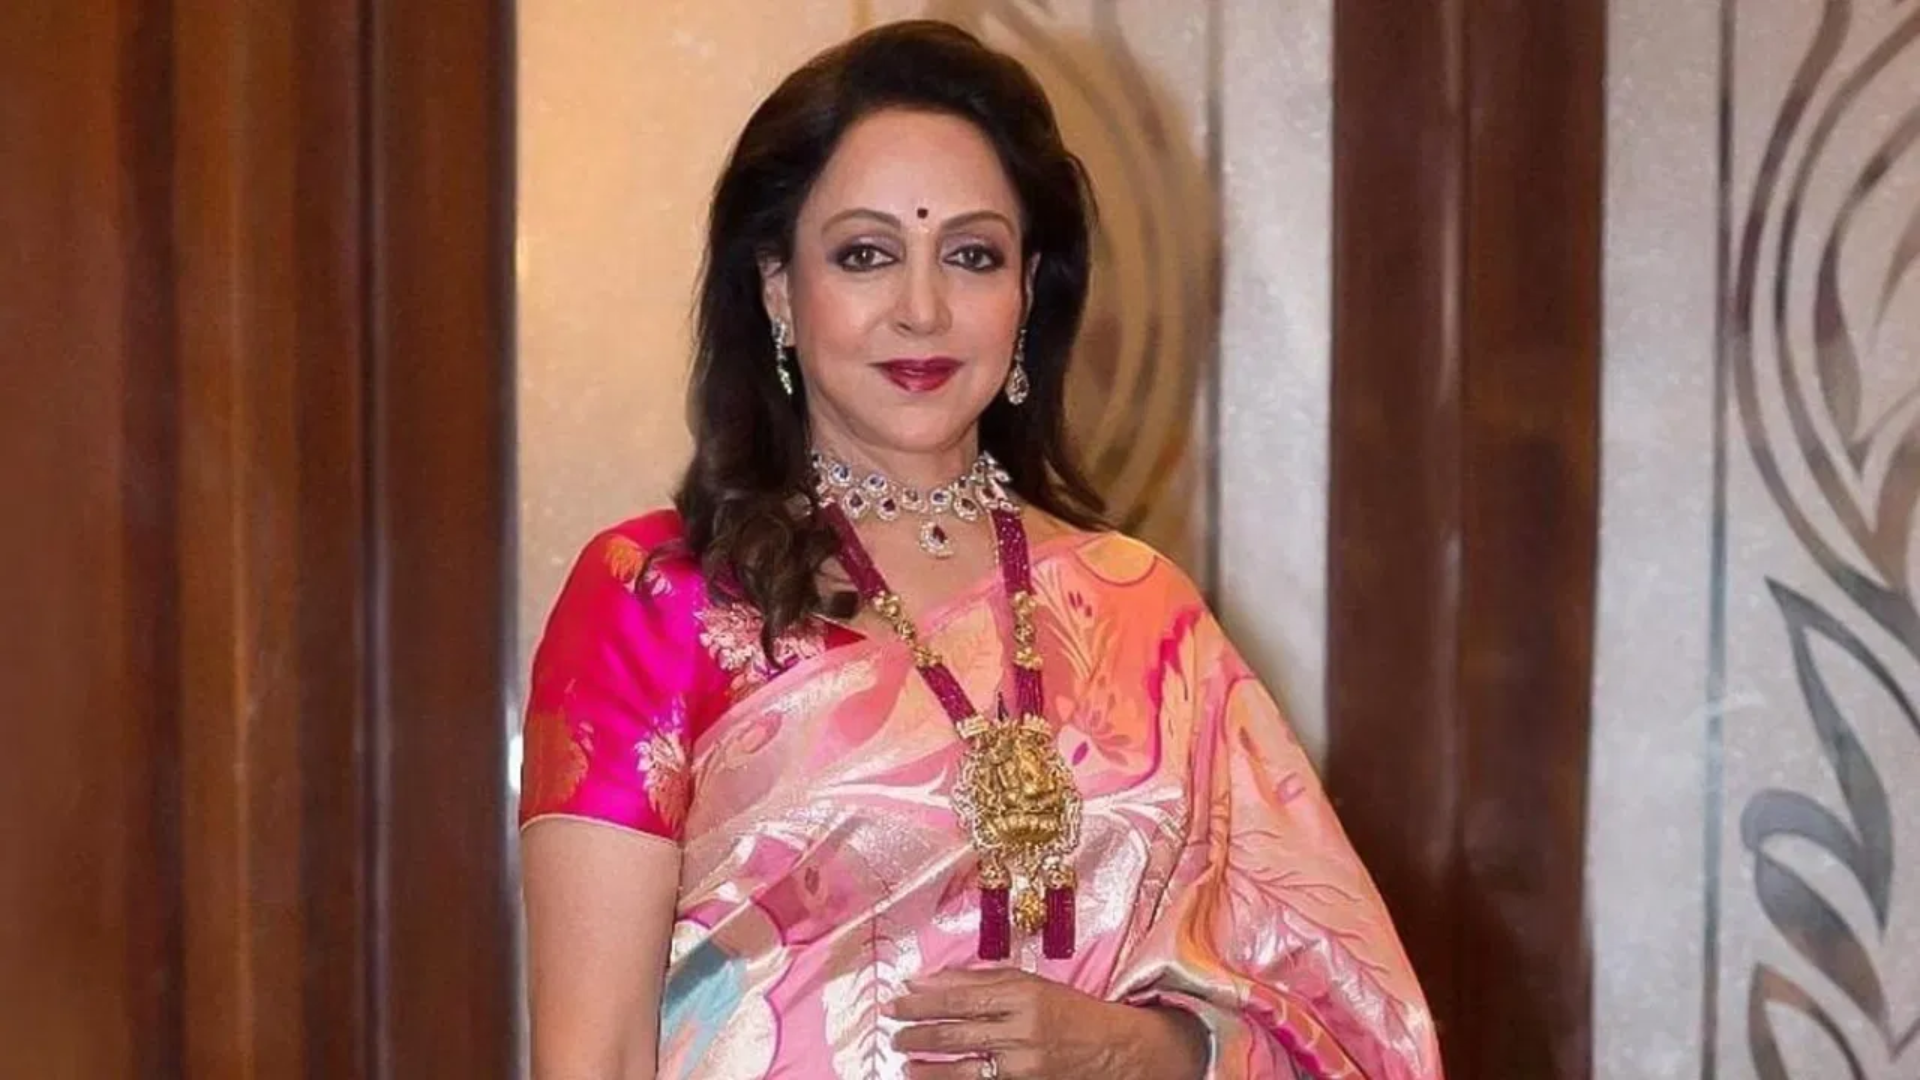 Hema Malini Subtly Hints At Opposition While Celebrating Holi, Emphasizing The Need For Recognition Of Our Achievements